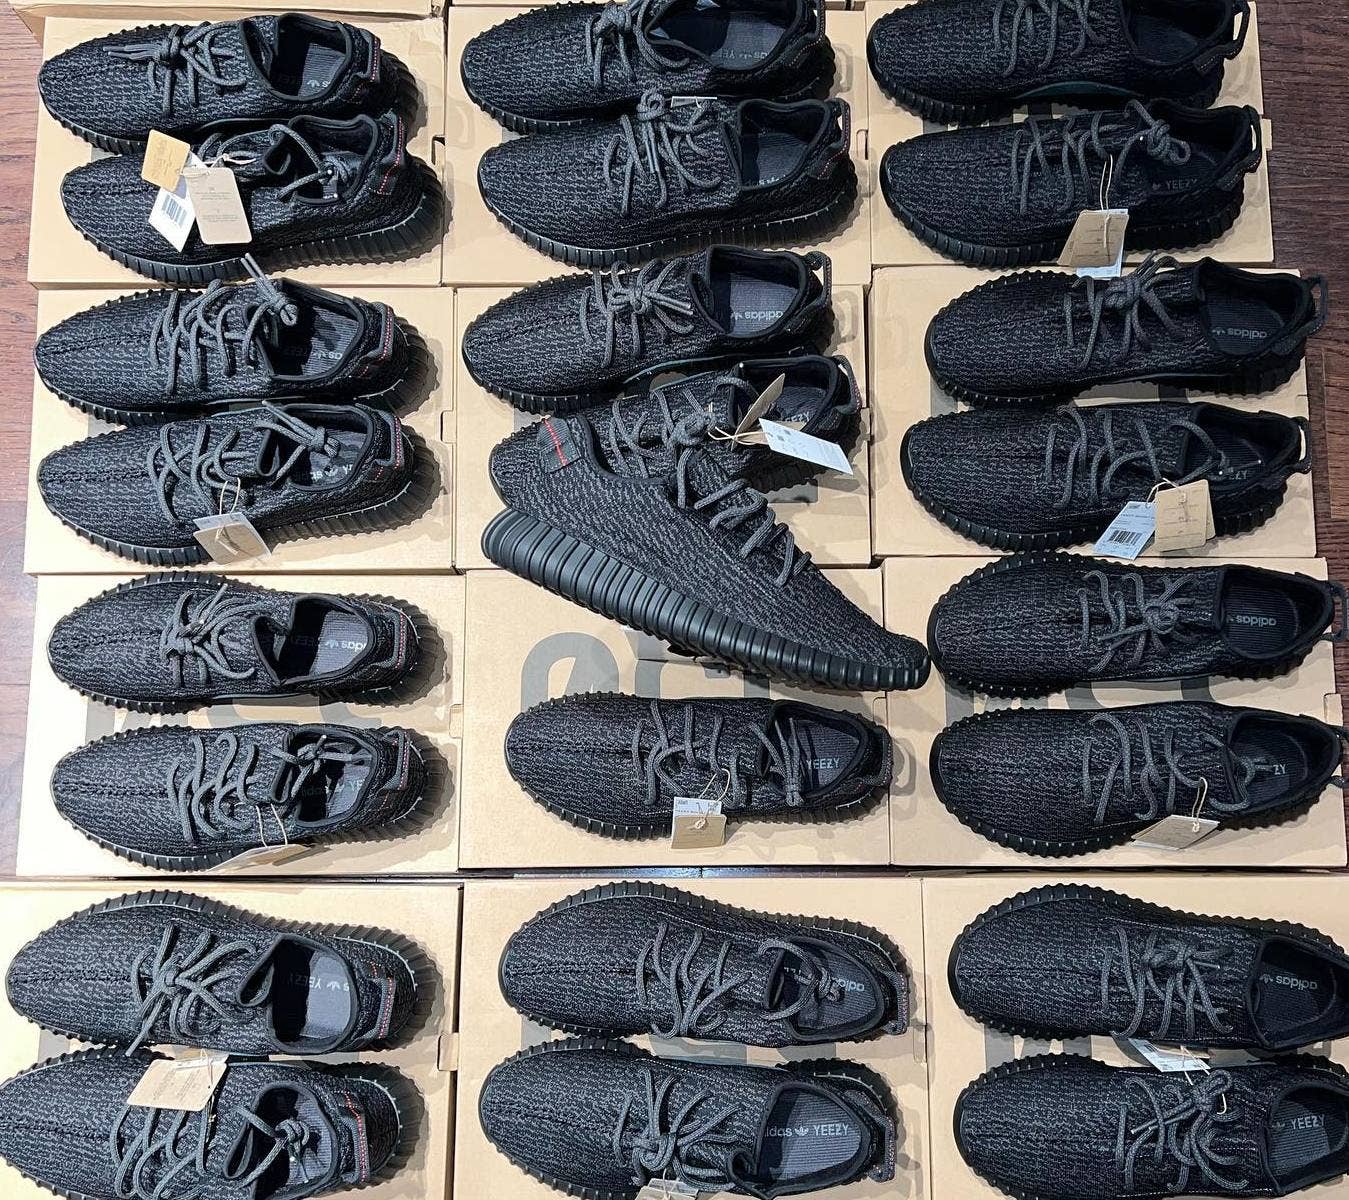 adidas YEEZY Final Shoe Sale in 2023: Everything to Know